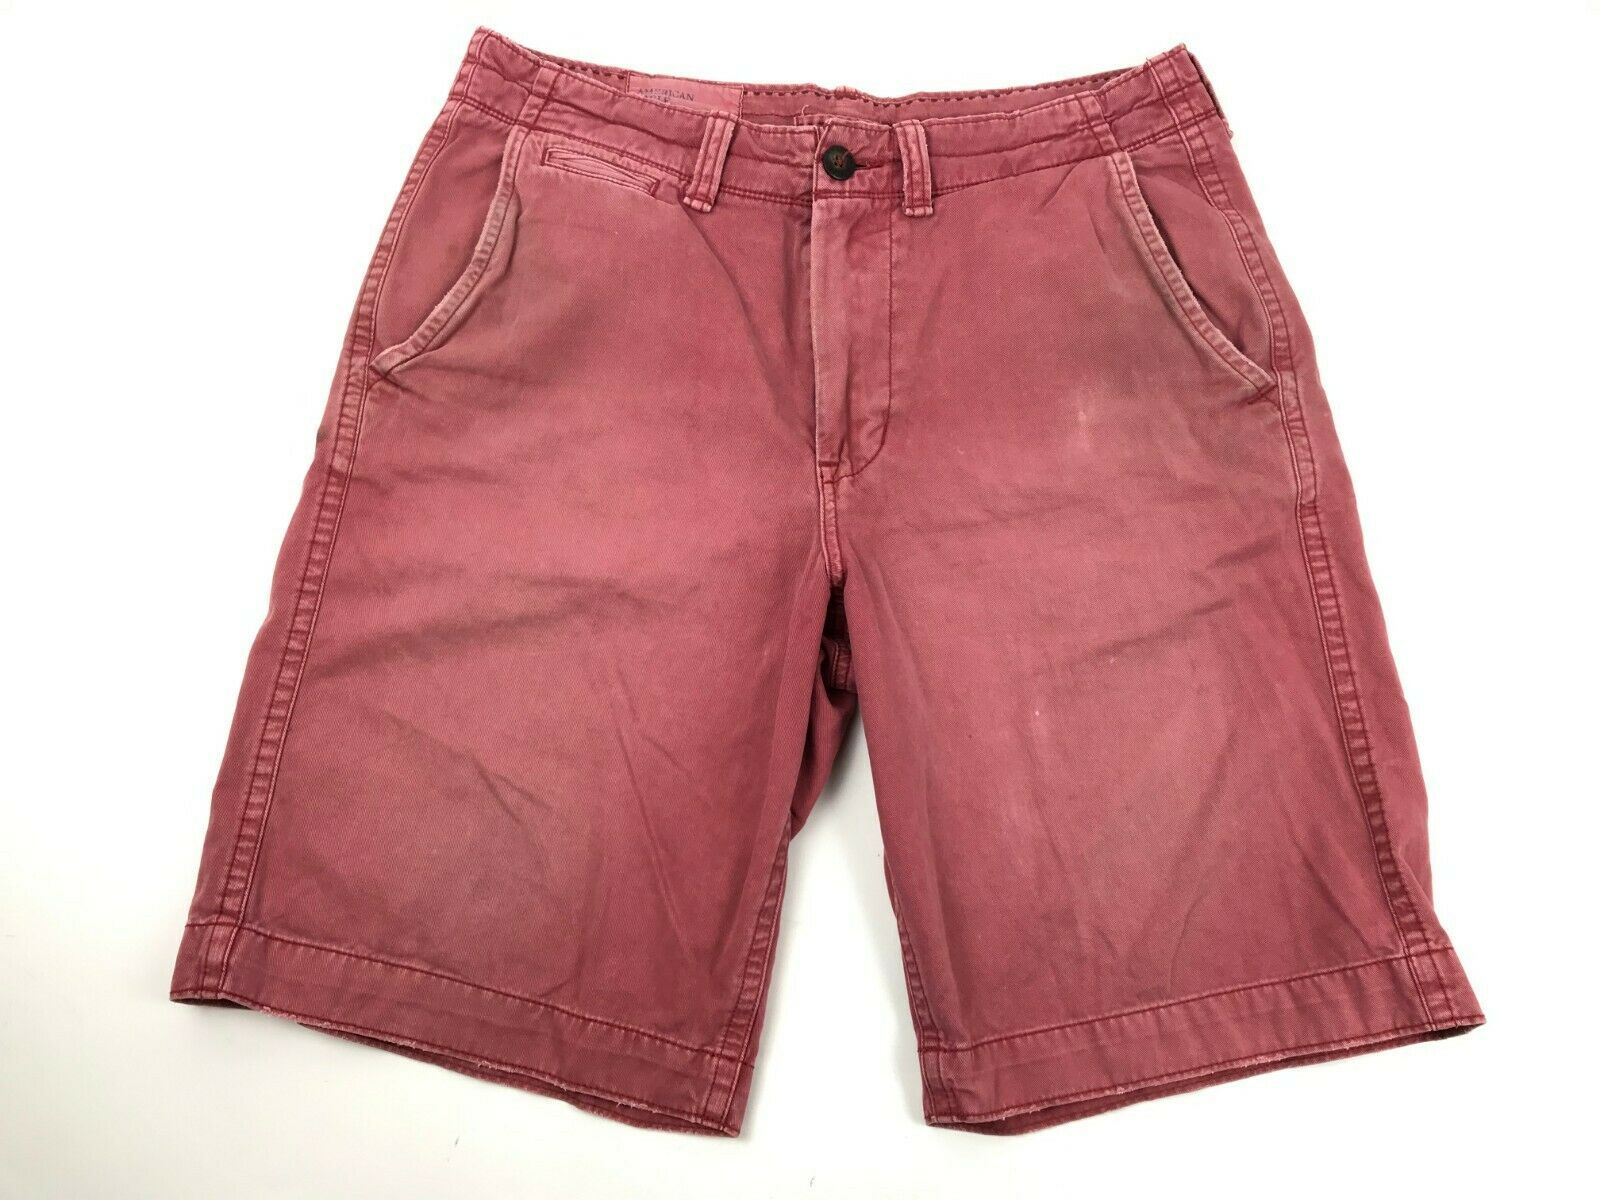 AMERICAN EAGLE Distressed Faded Red Longer Length 23" AE AEO Classic Shorts 33 - $10.94